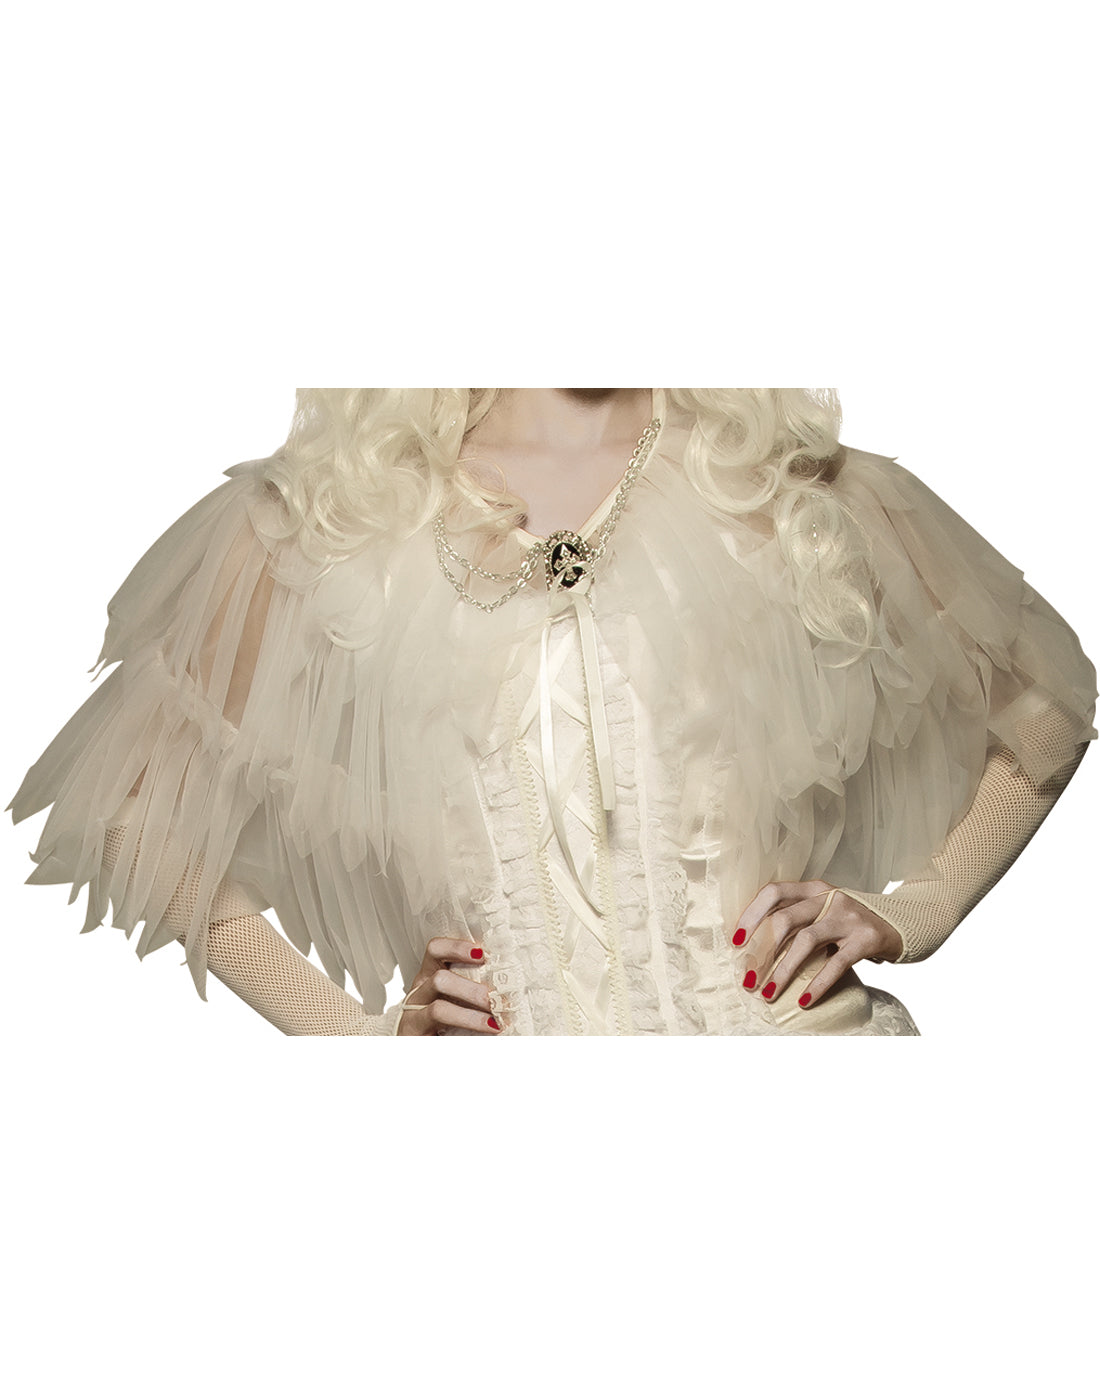 Rubie's Costumes COSTUMES: ACCESSORIES White Good Witch Ruffled Sheer Capelet